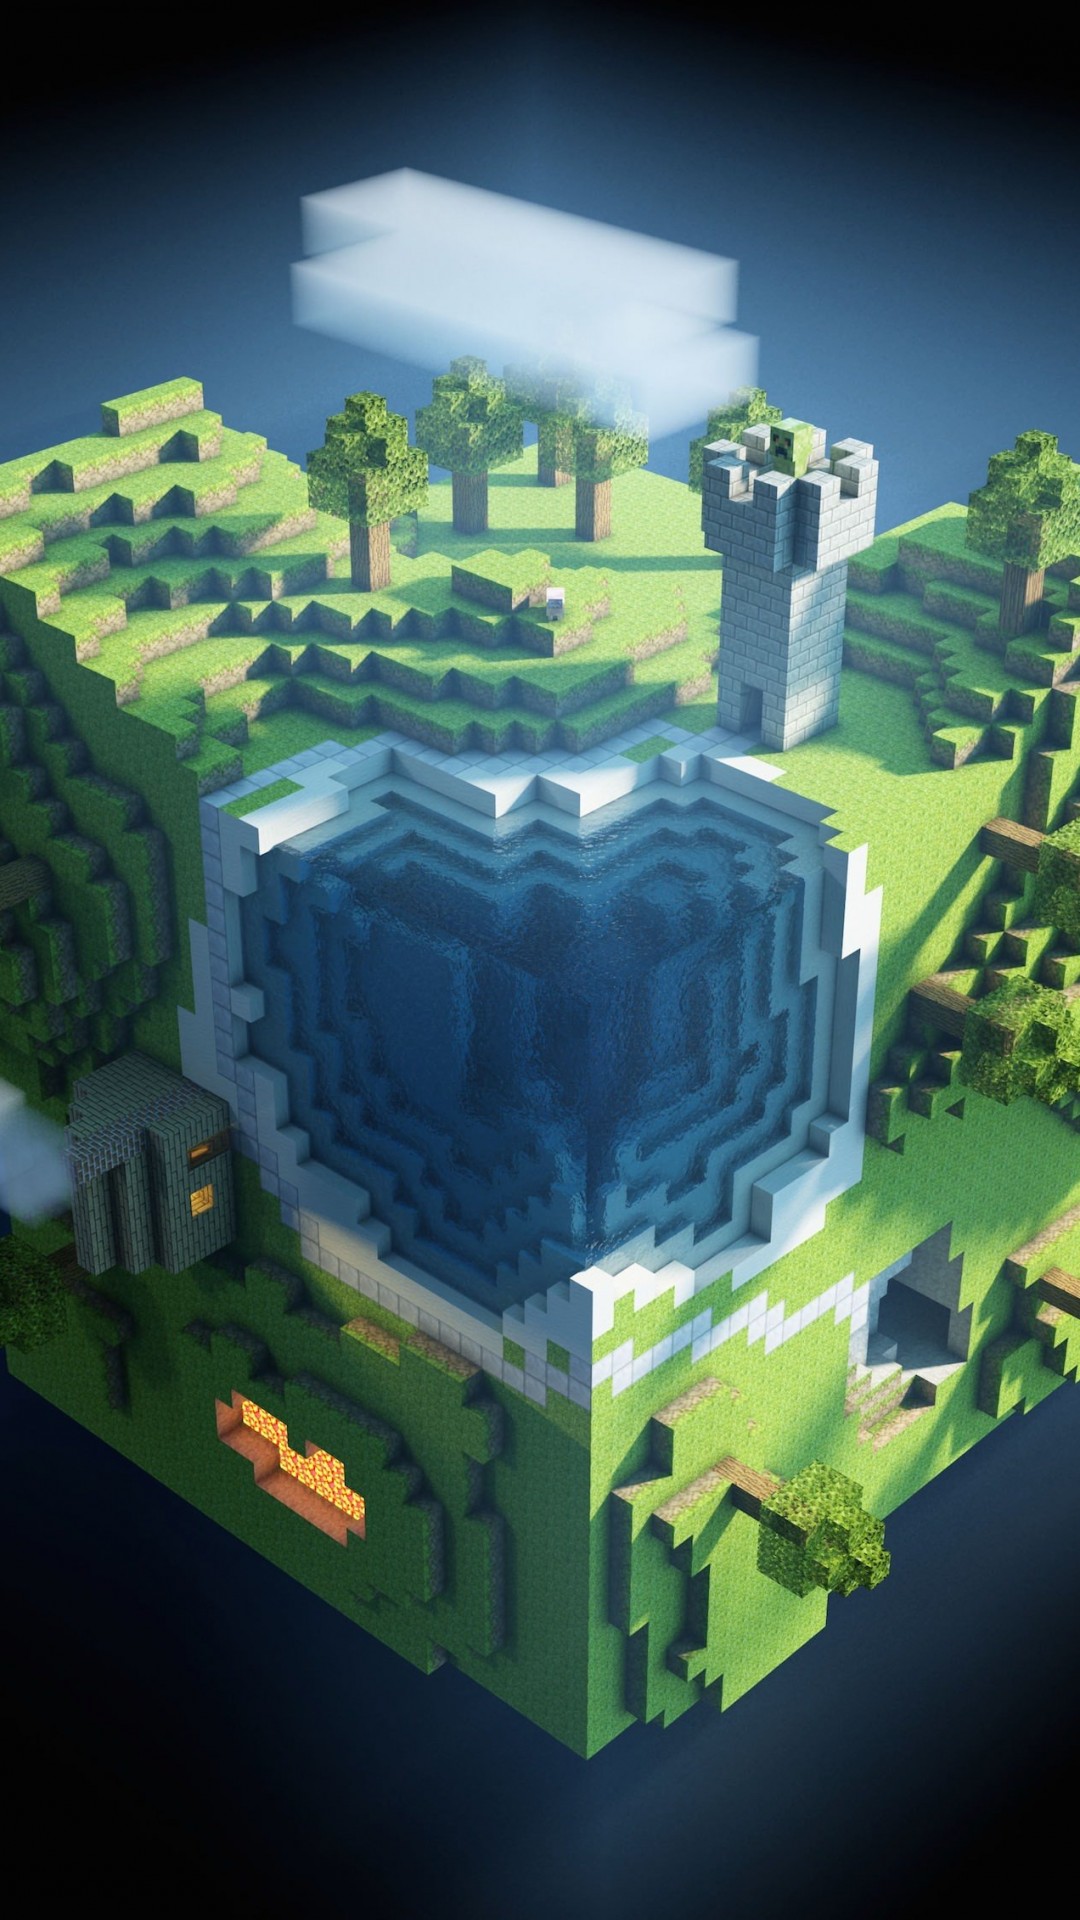 Planet Minecraft Wallpaper for SONY Xperia Z1